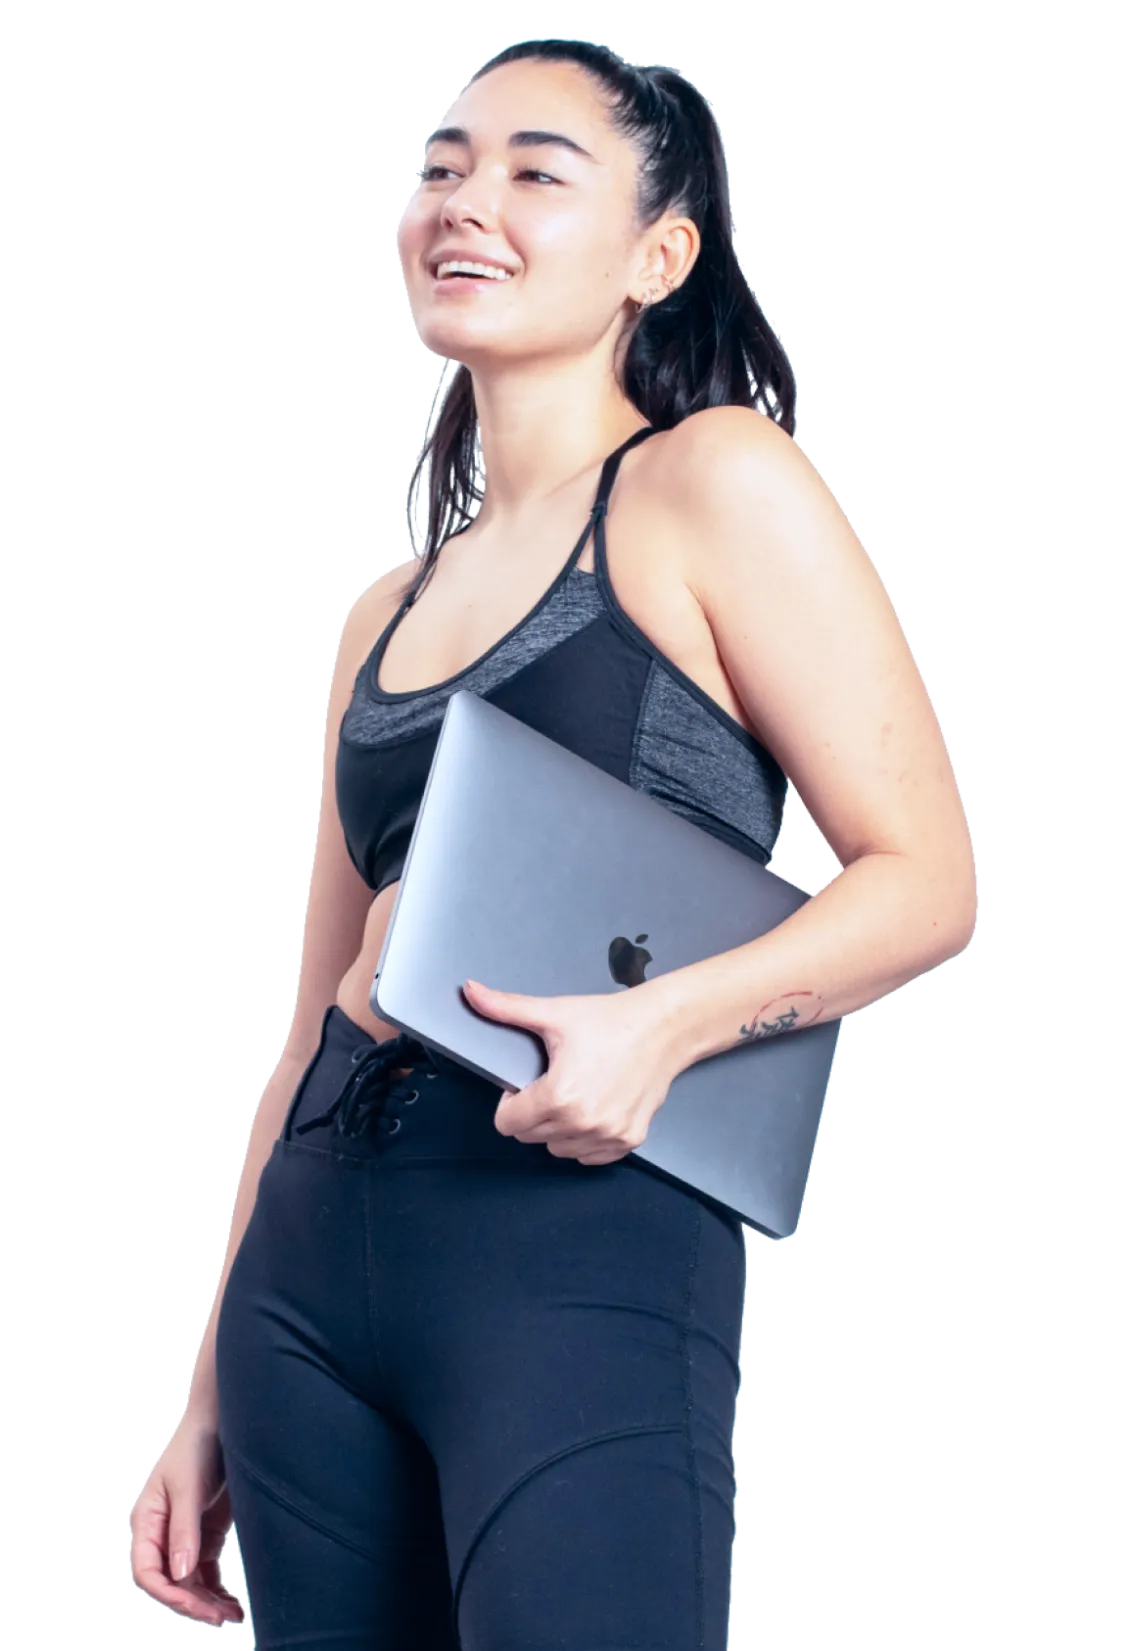 Woman in athletic clothes holding laptop